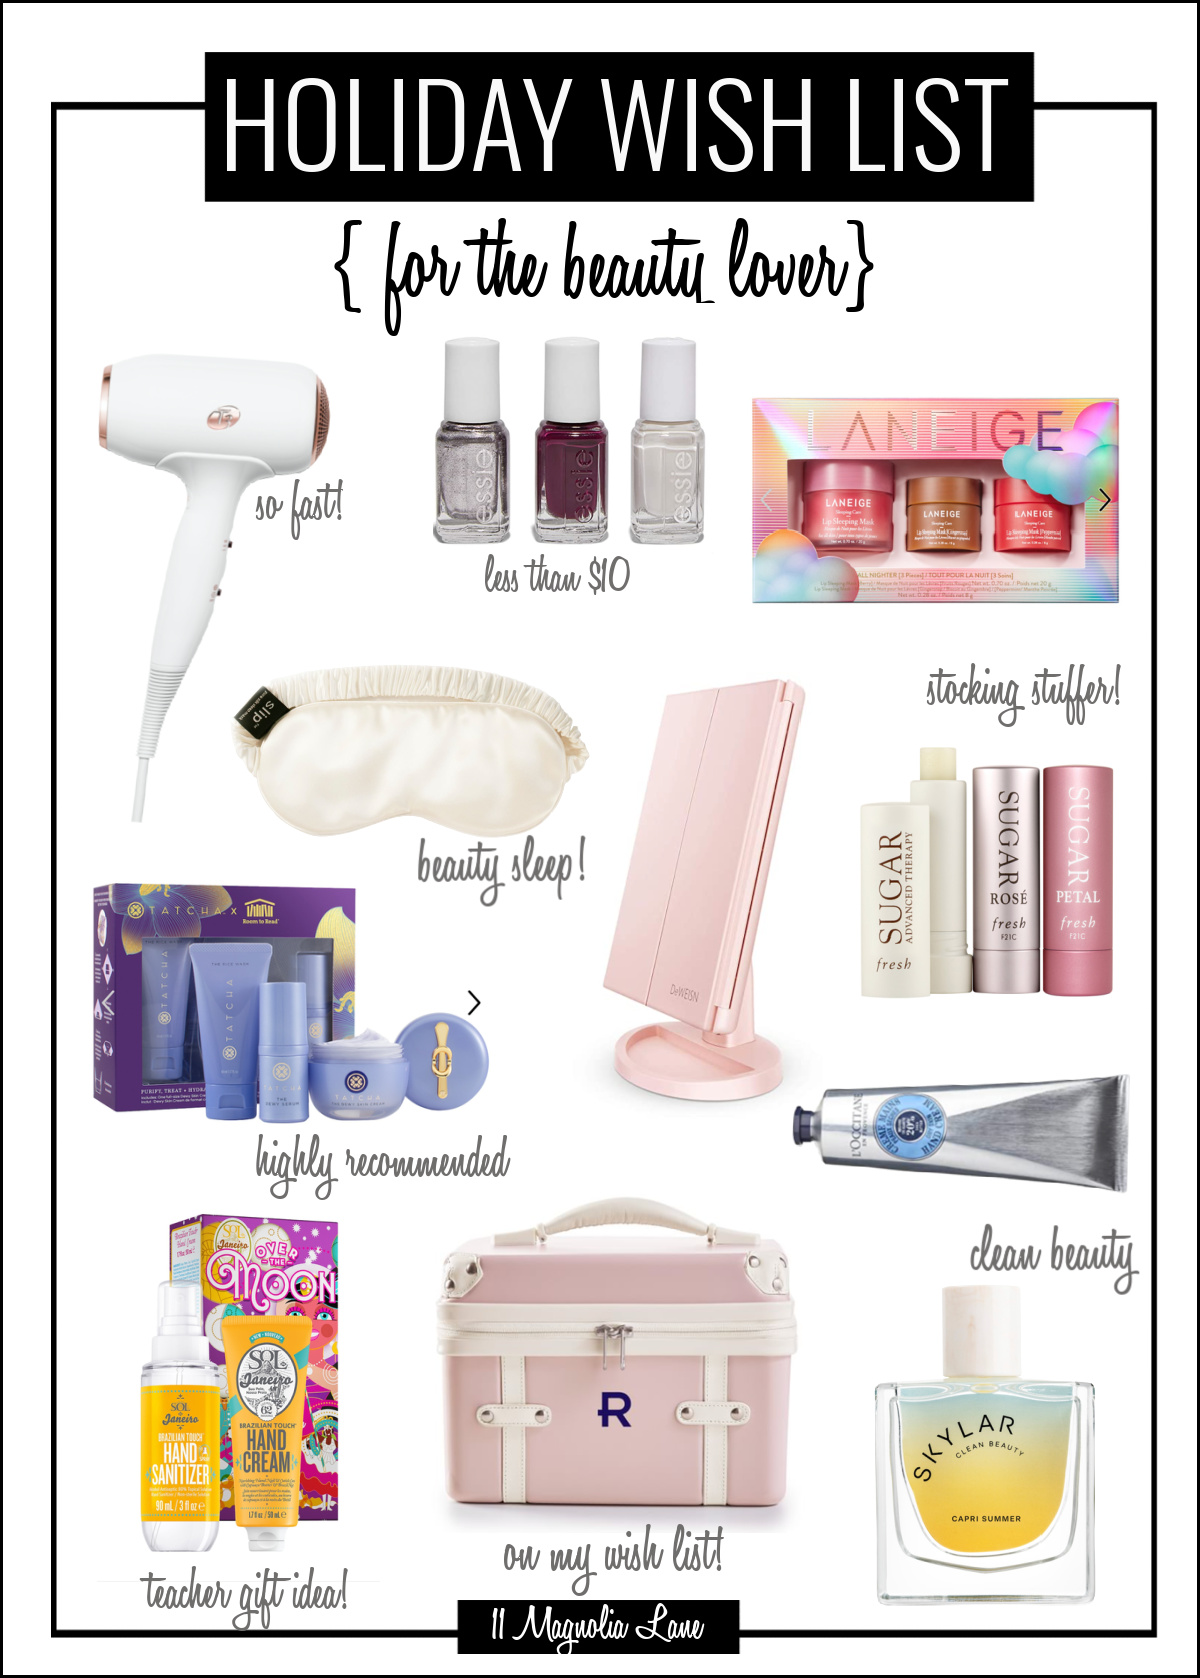 https://www.11magnolialane.com/wp-content/uploads/2021/11/Holiday-Wish-List-Gift-Guide-Beauty-Lover-2.jpg